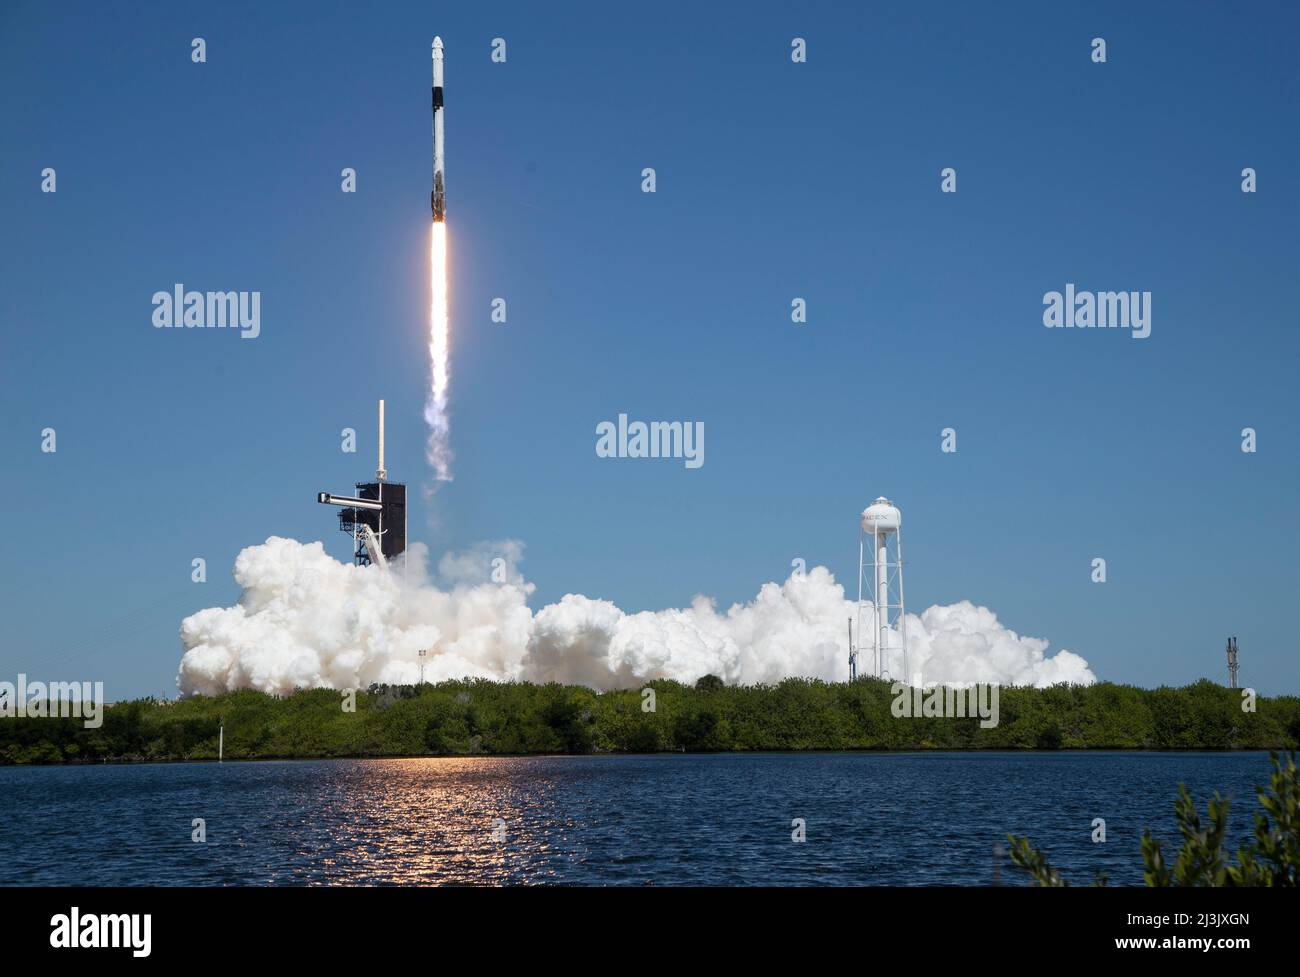 Florida, USA. 08th Apr, 2022. A SpaceX Falcon 9 rocket carrying the company's Crew Dragon spacecraft is launched on Axiom Mission 1 (Ax-1) to the International Space Station with Commander Michael López-Alegría of Spain and the United States, Pilot Larry Connor of the United States, and Mission Specialists Eytan Stibbe of Israel, and Mark Pathy of Canada aboard, Friday, April 8, 2022, at NASA's Kennedy Space Center in Florida. The Ax-1 mission is the first private astronaut mission to the International Space Station. López-Alegría, Connor, Pathy, Stibbe launched at 11:17 a.m. from Launch Compl Stock Photo